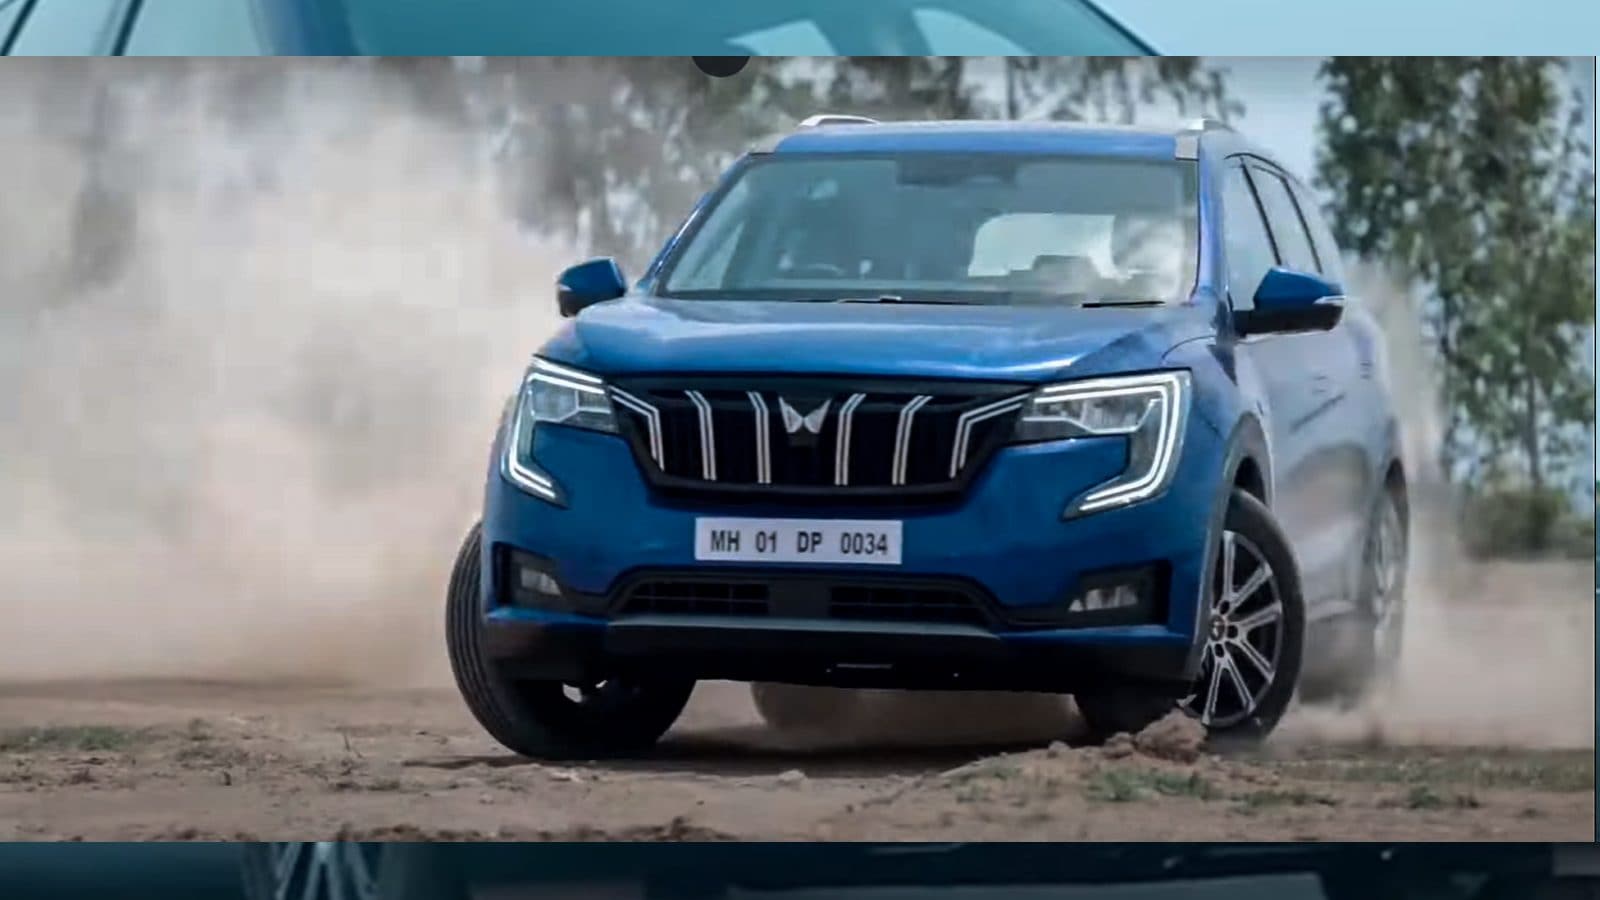 New Mahindra XUV700 SUV Unveiled In 5 And 7 Seater Cabin Options, India Launch In October